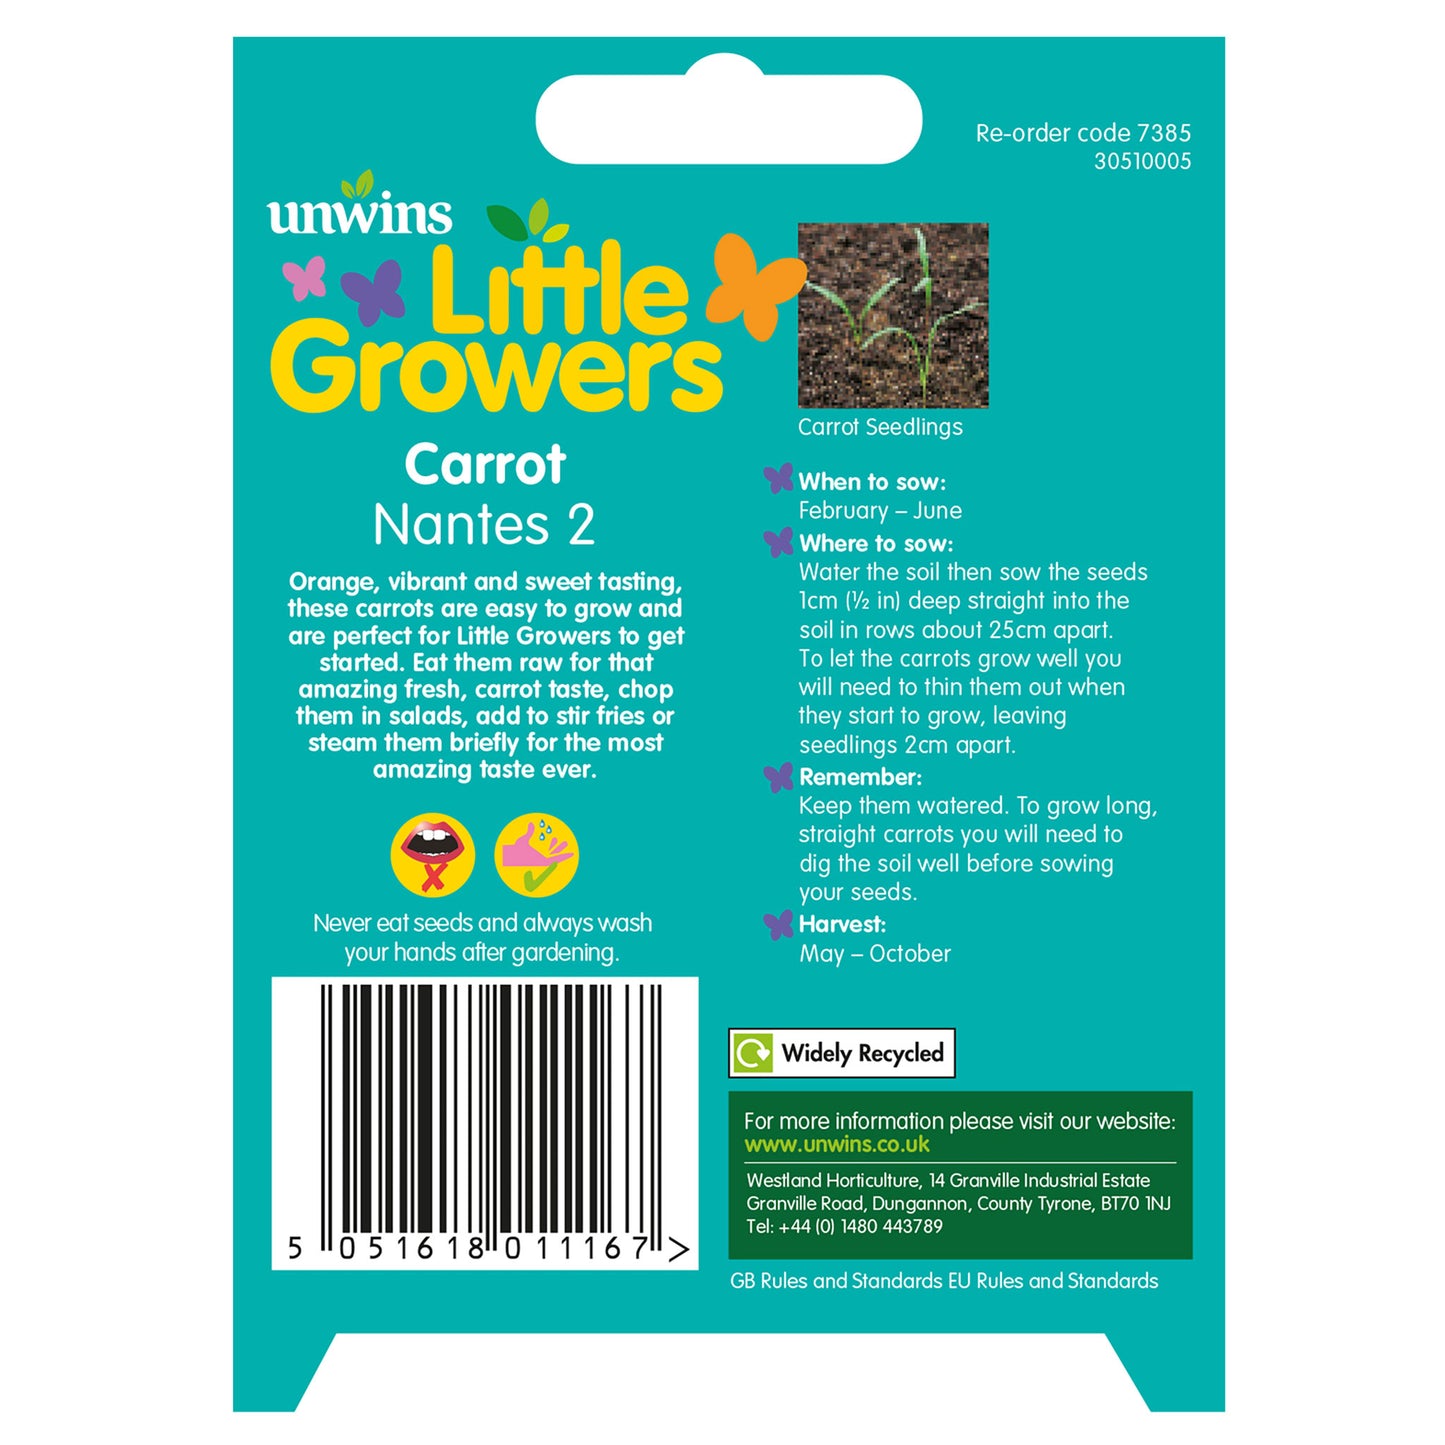 Little Growers Carrot Nantes 2 Seeds back of pack